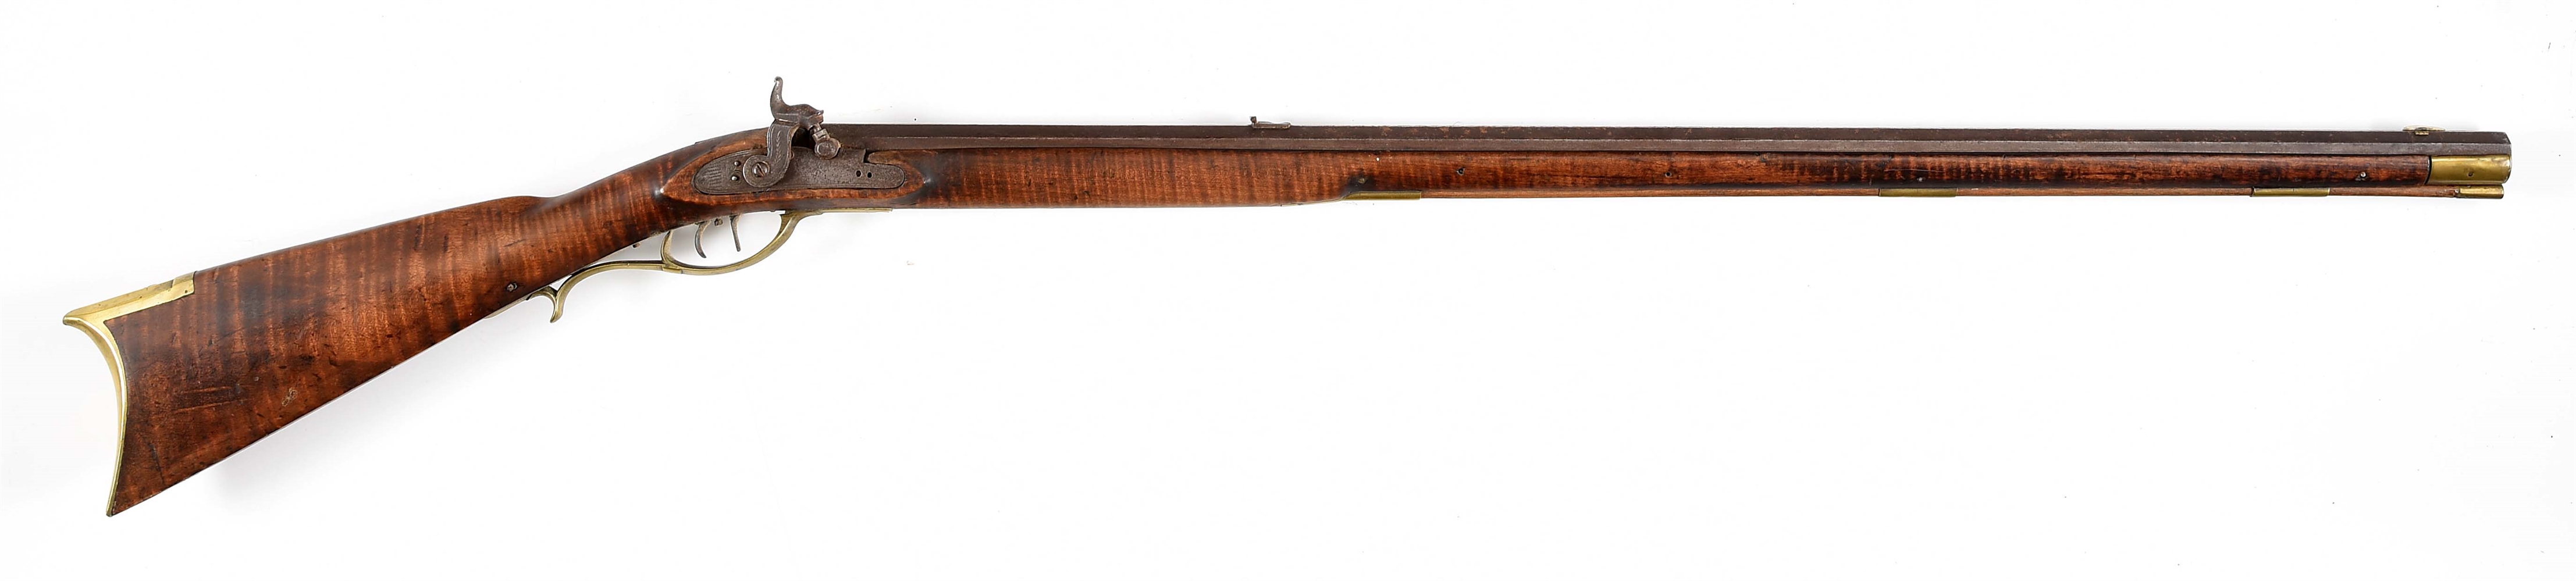 (A) PERCUSSION RIFLE WITH TIGER STRIP MAPLE STOCK